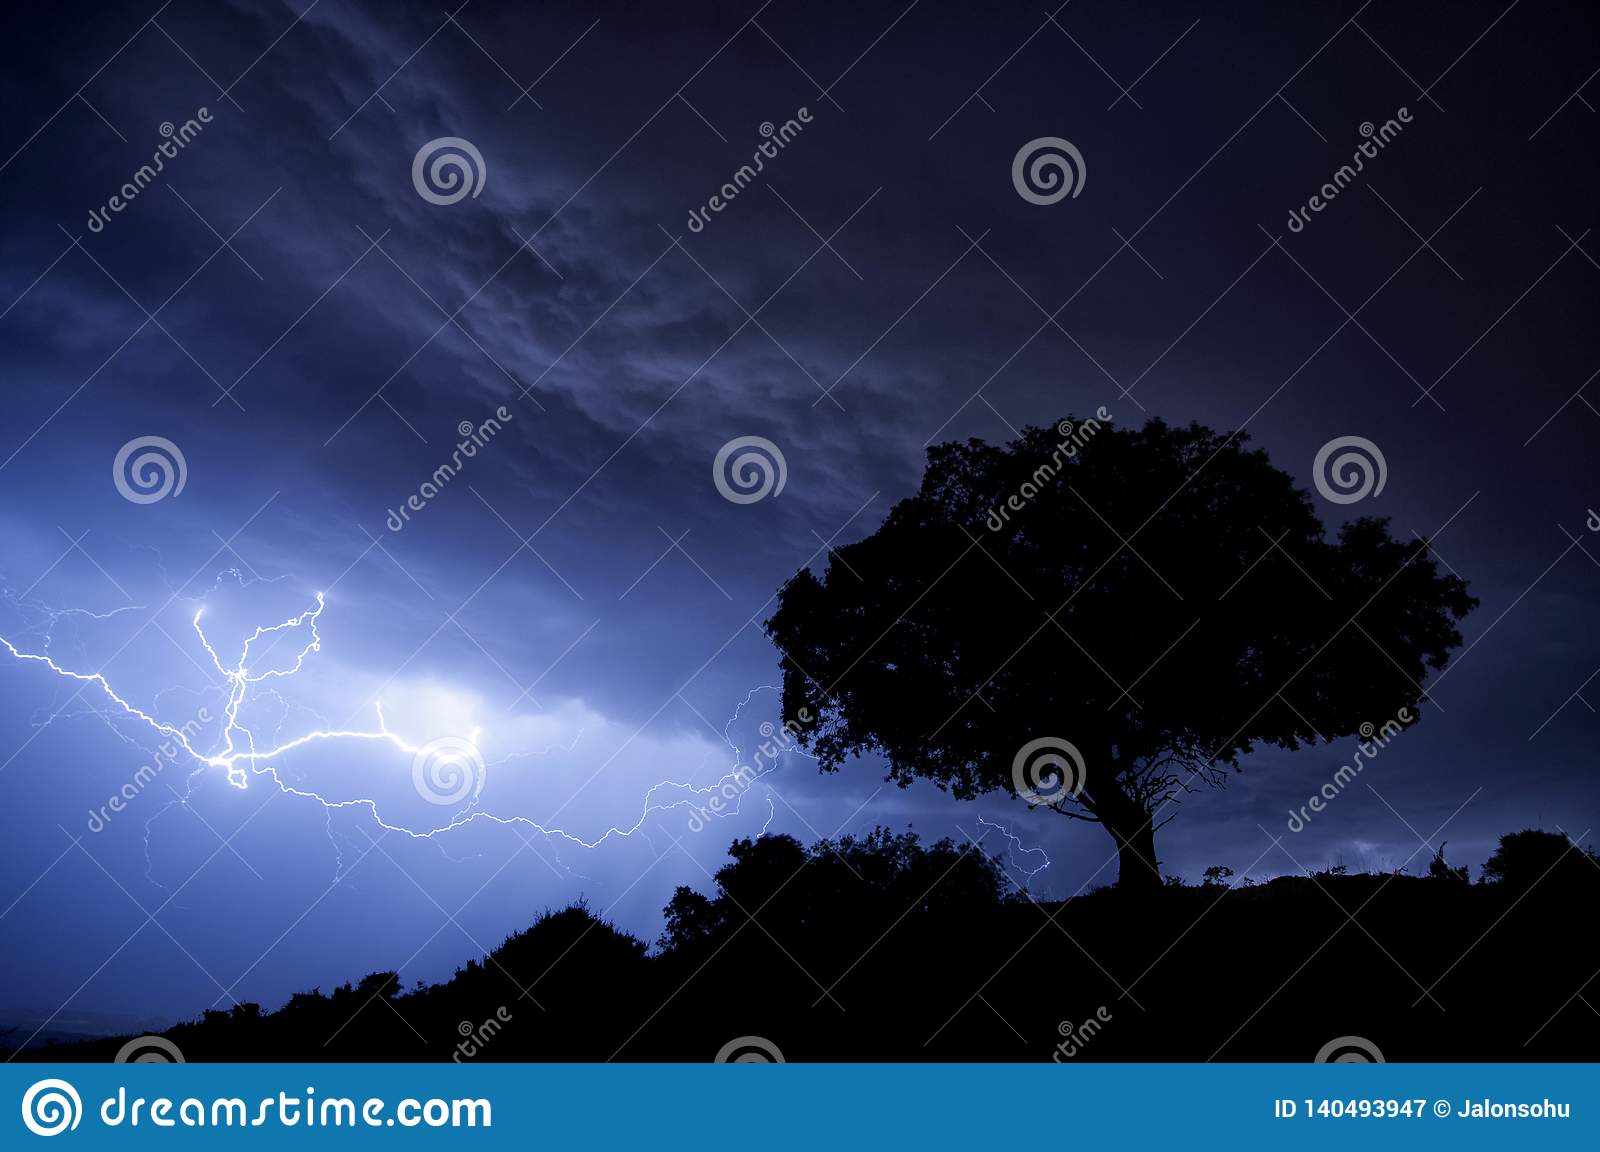 why are oak and fir trees more likely to be struck by lightning than beech and pine in a thunder storm